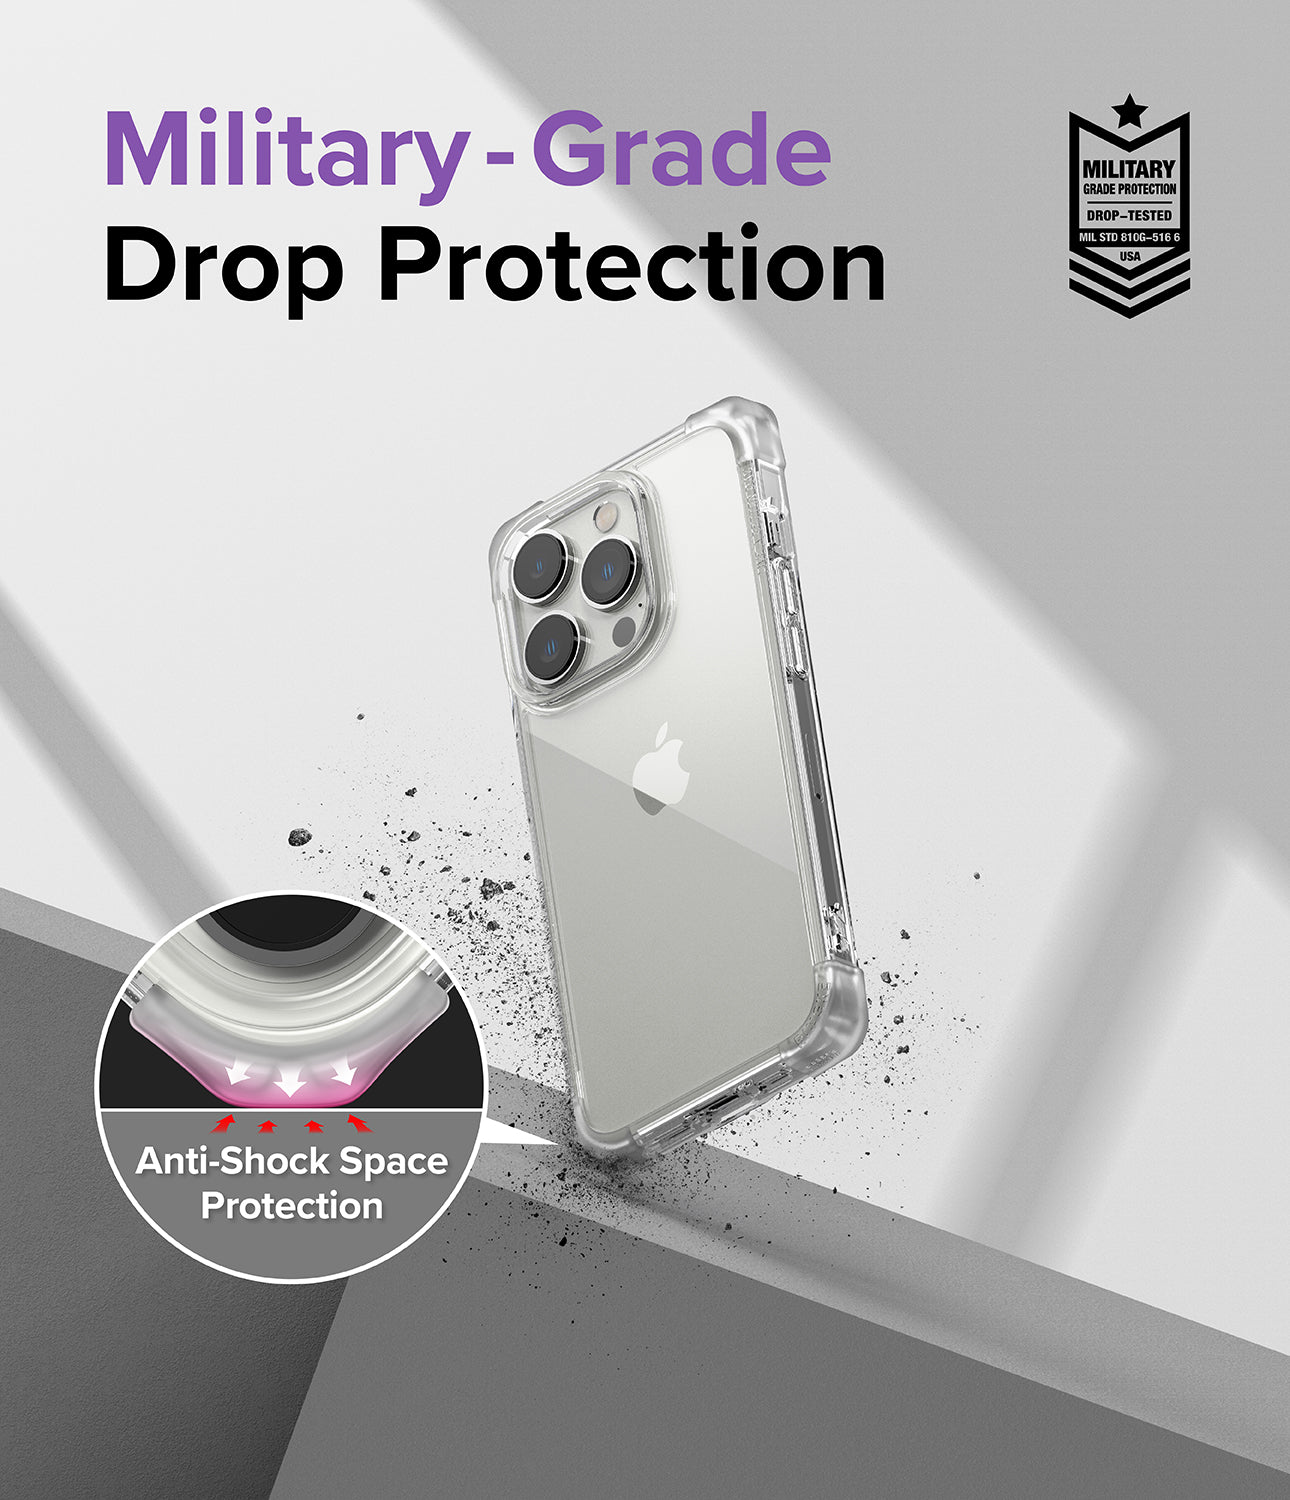 Military - Grade Drop Protection l Anti-Shock Space Protection.